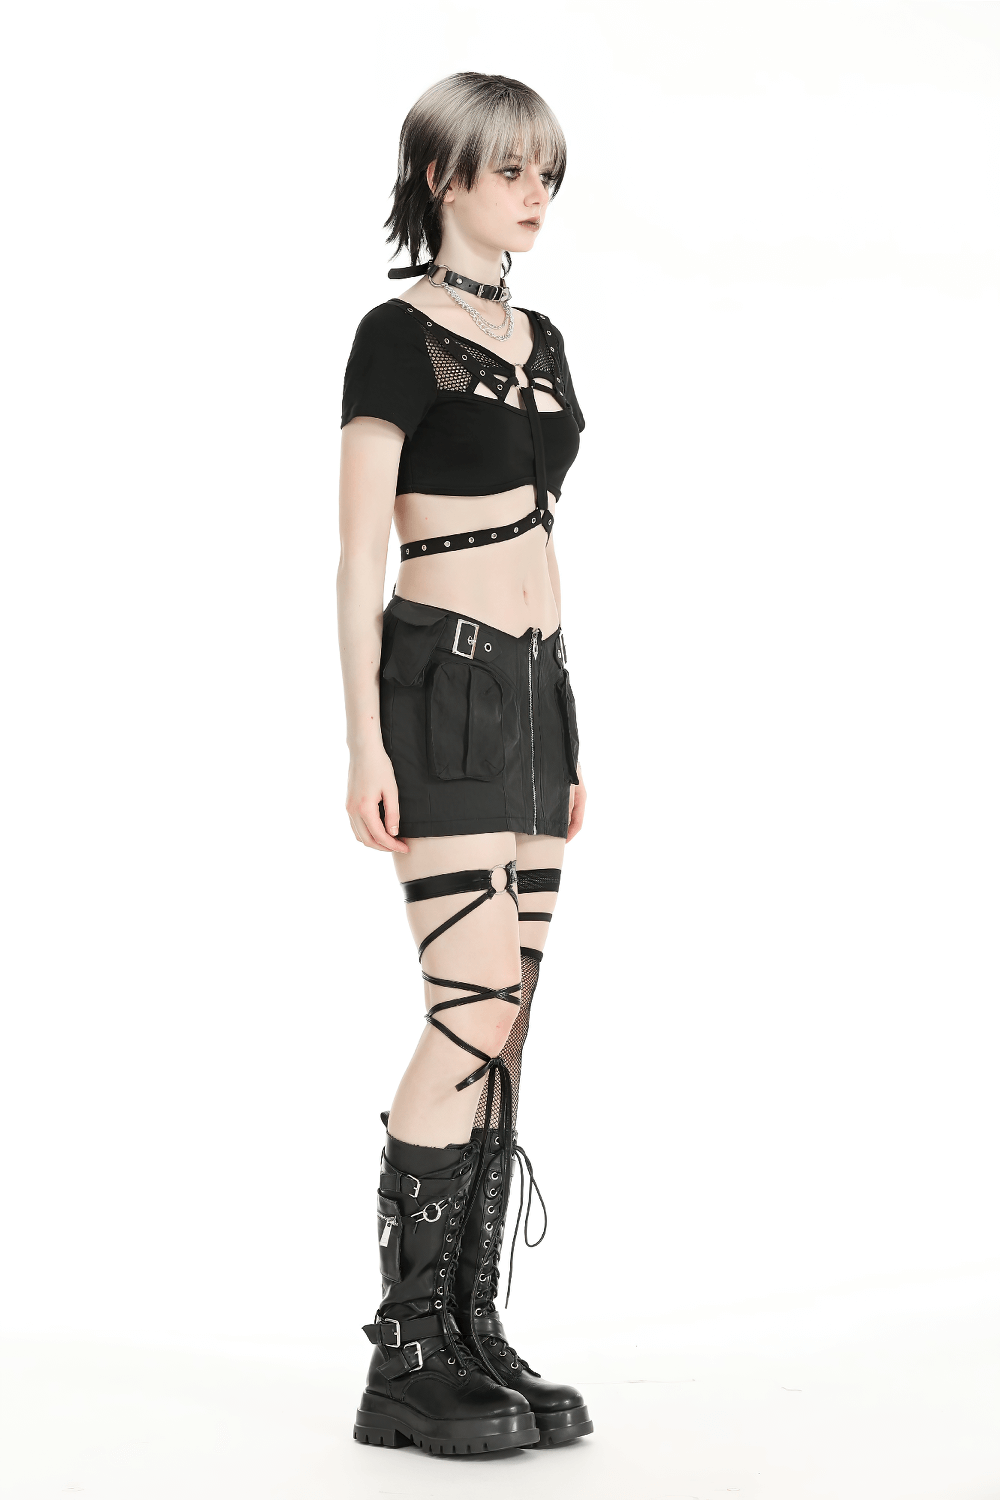 Stylish Punk Women's Crop Top with Metal Accents